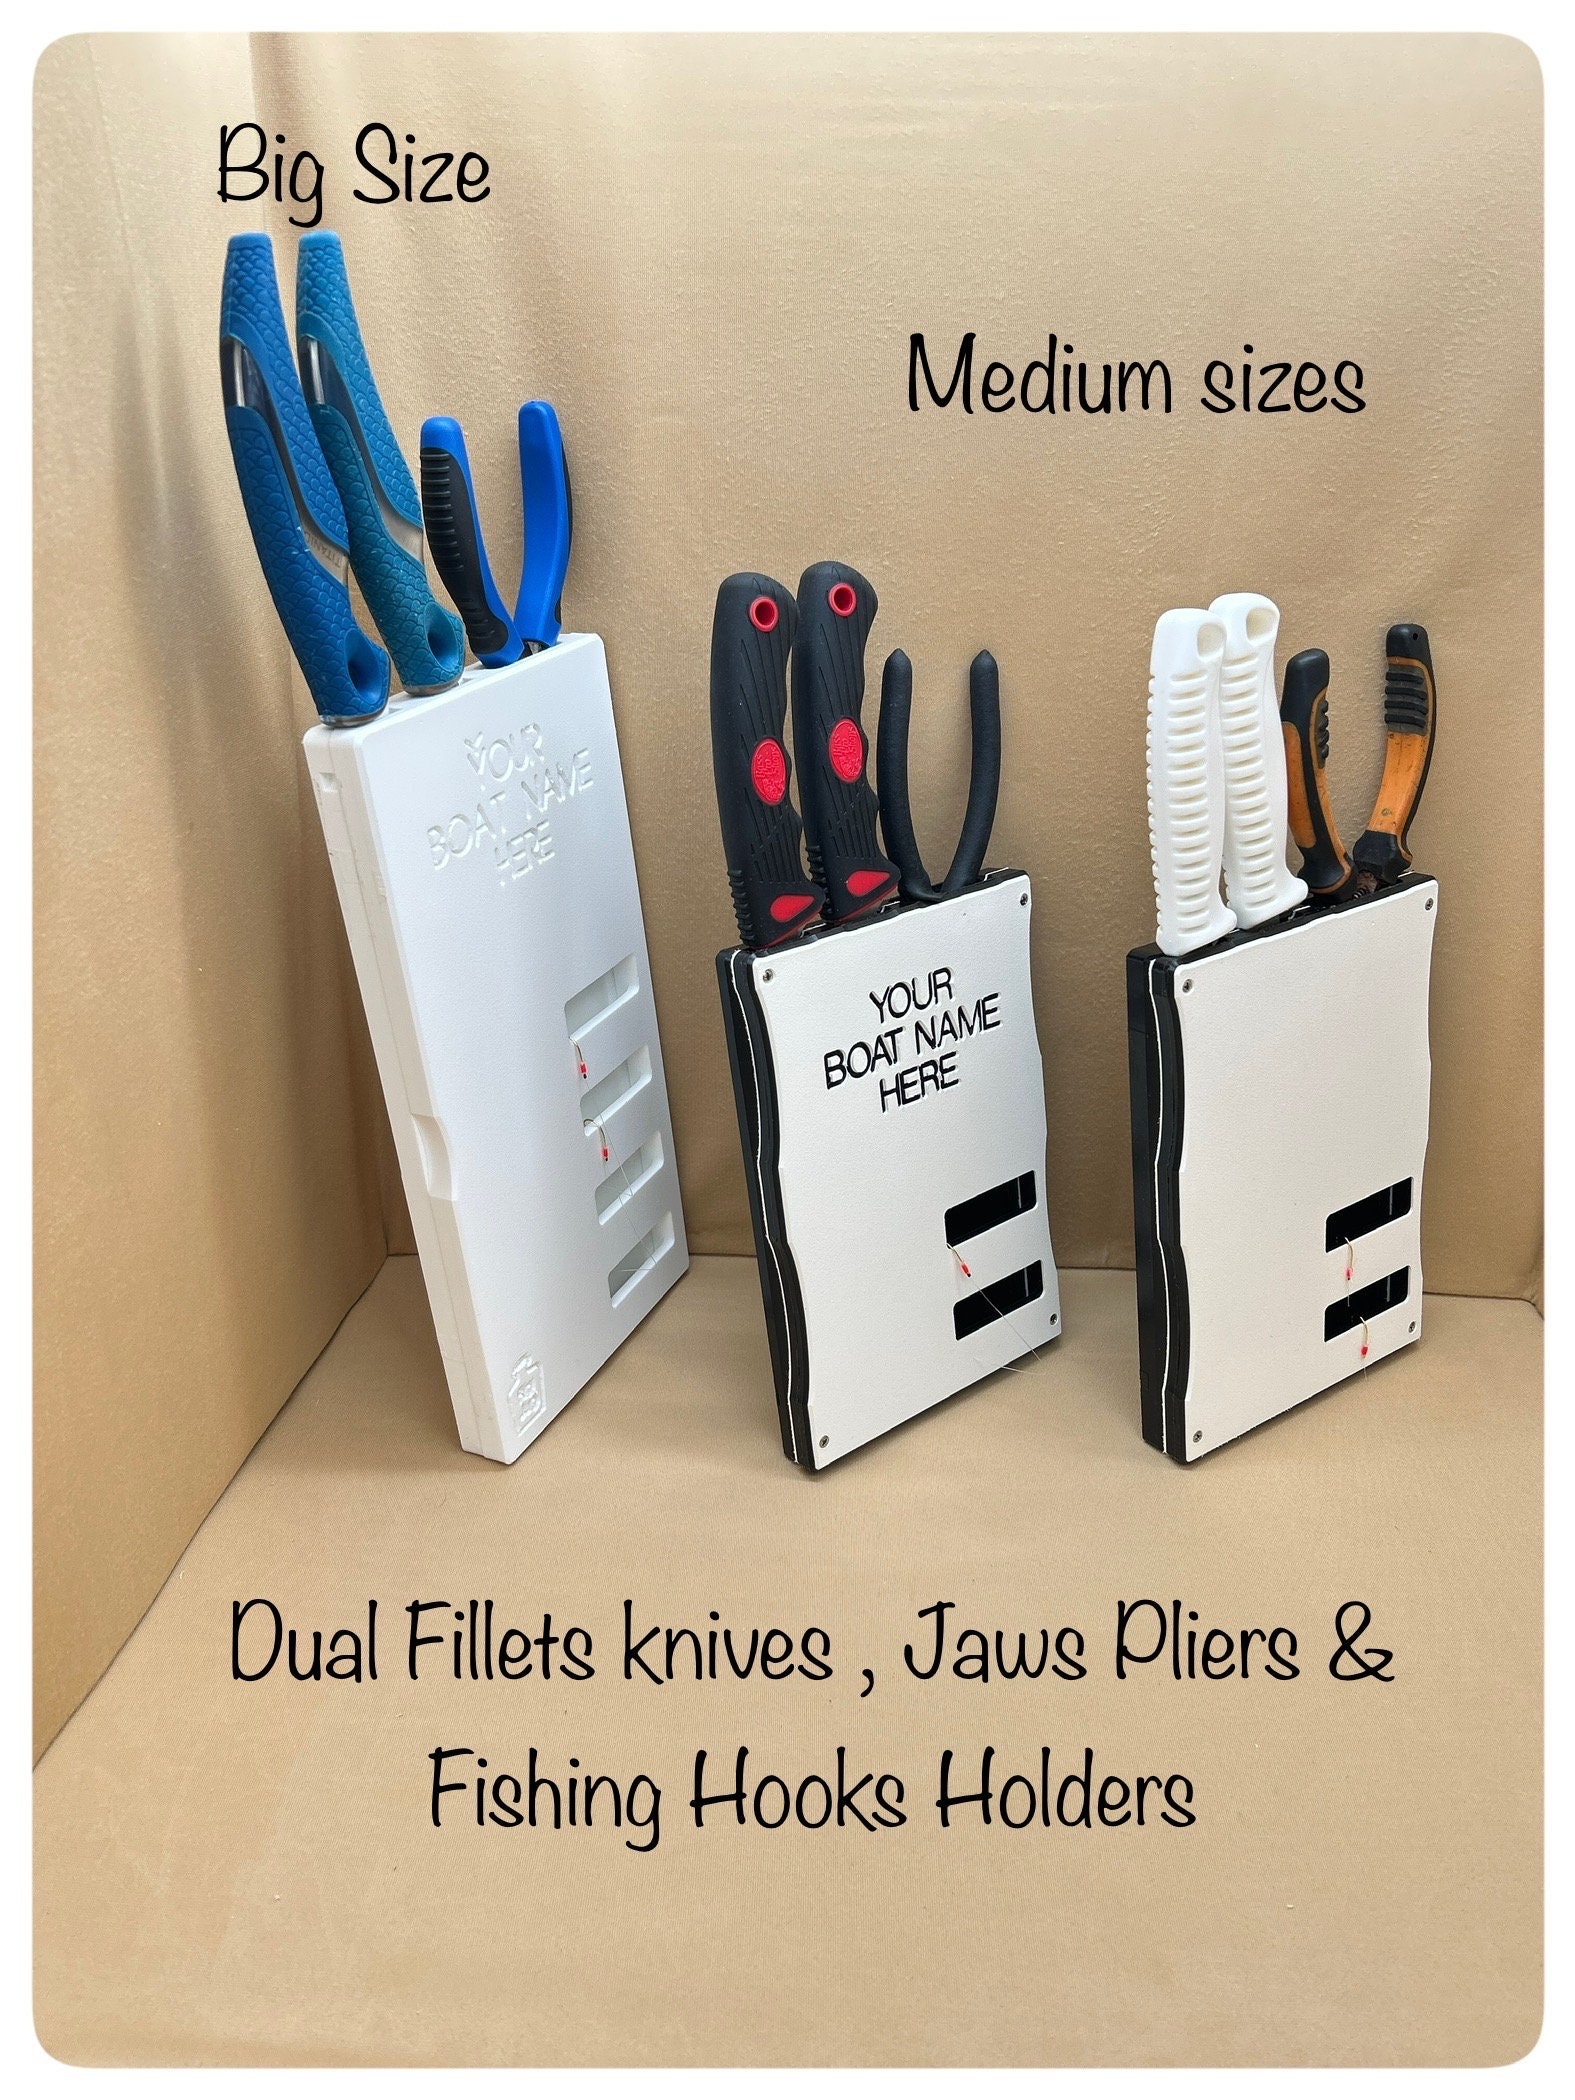 2 Fillets Knives Holder, Pliers & Fishing Hooks Holders Starboard Marine  Case Mounted. -  Canada